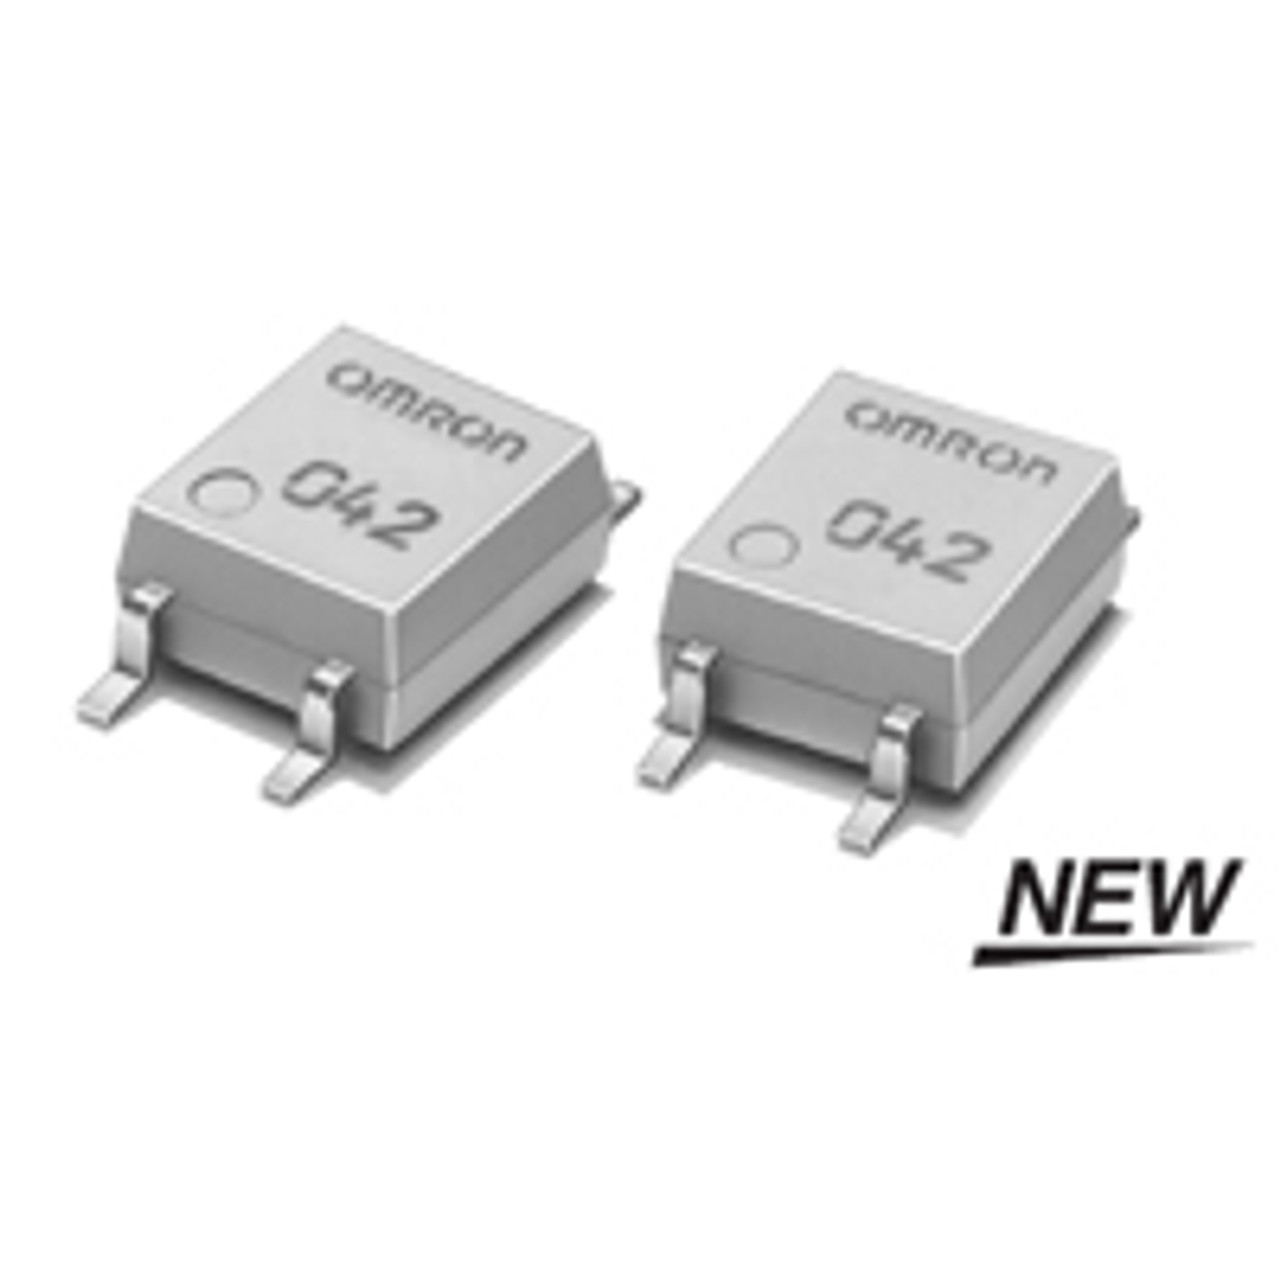 Omron G3VM-351G MOSFET Relays